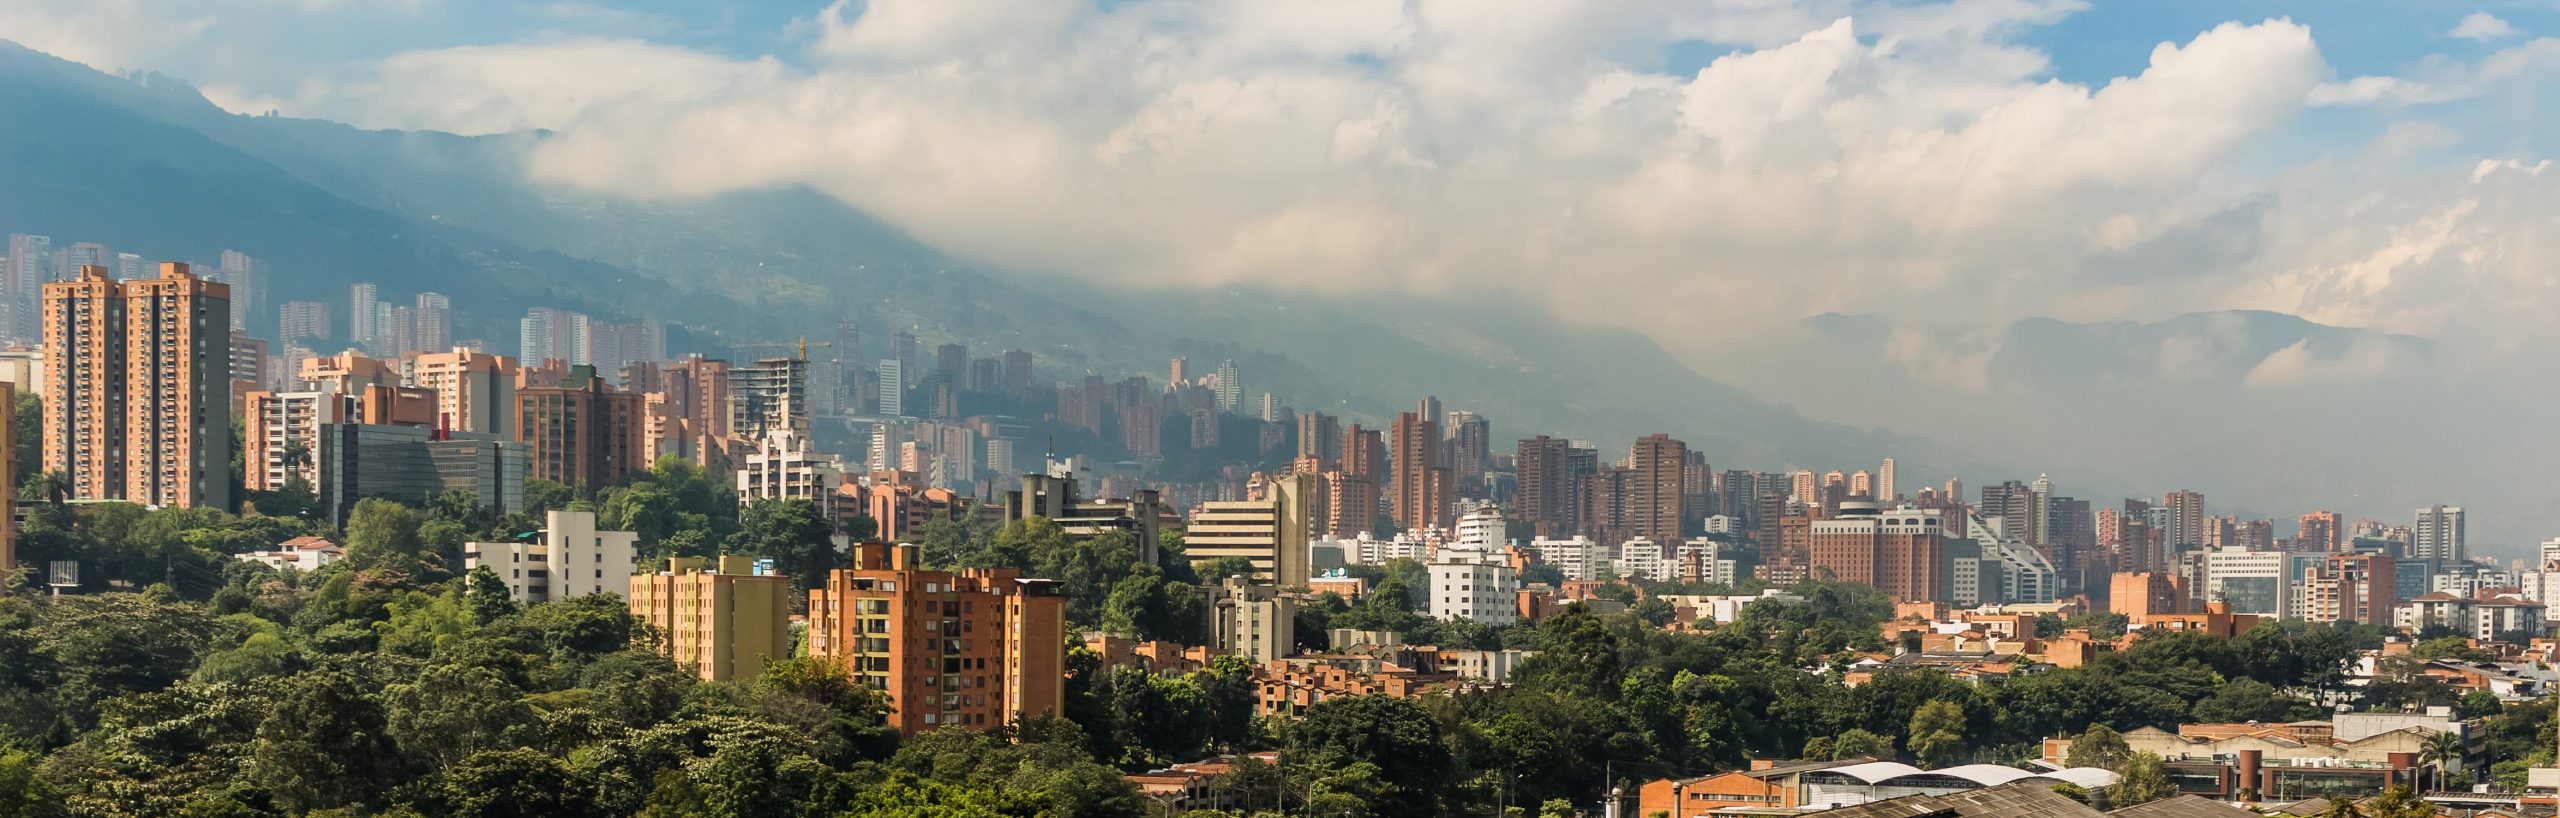 Panoramic view of a city in Colombia